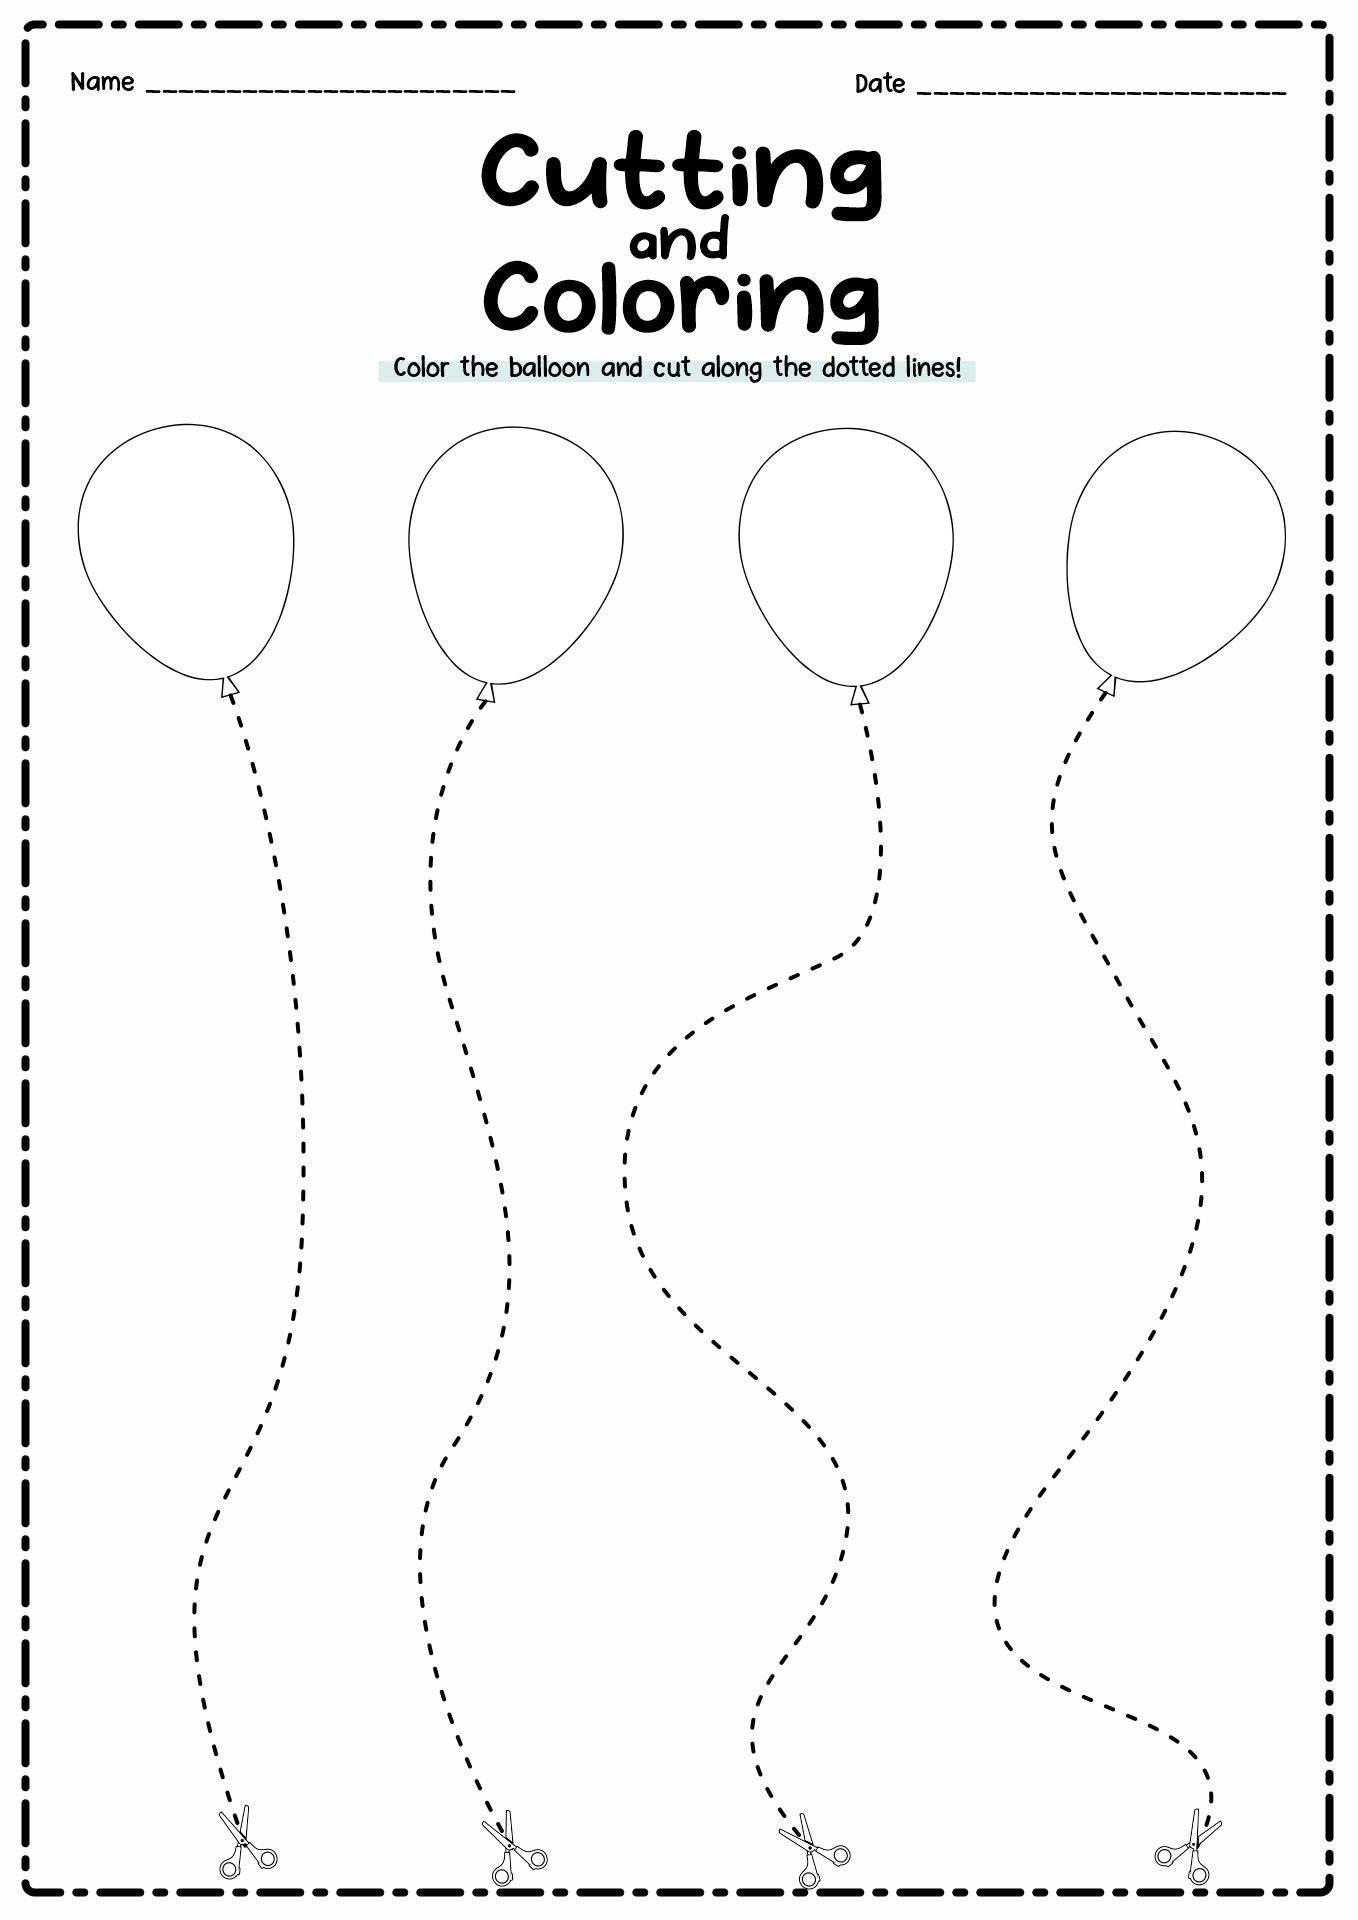 13-best-images-of-preschool-worksheets-cutting-practice-tree-cut-out